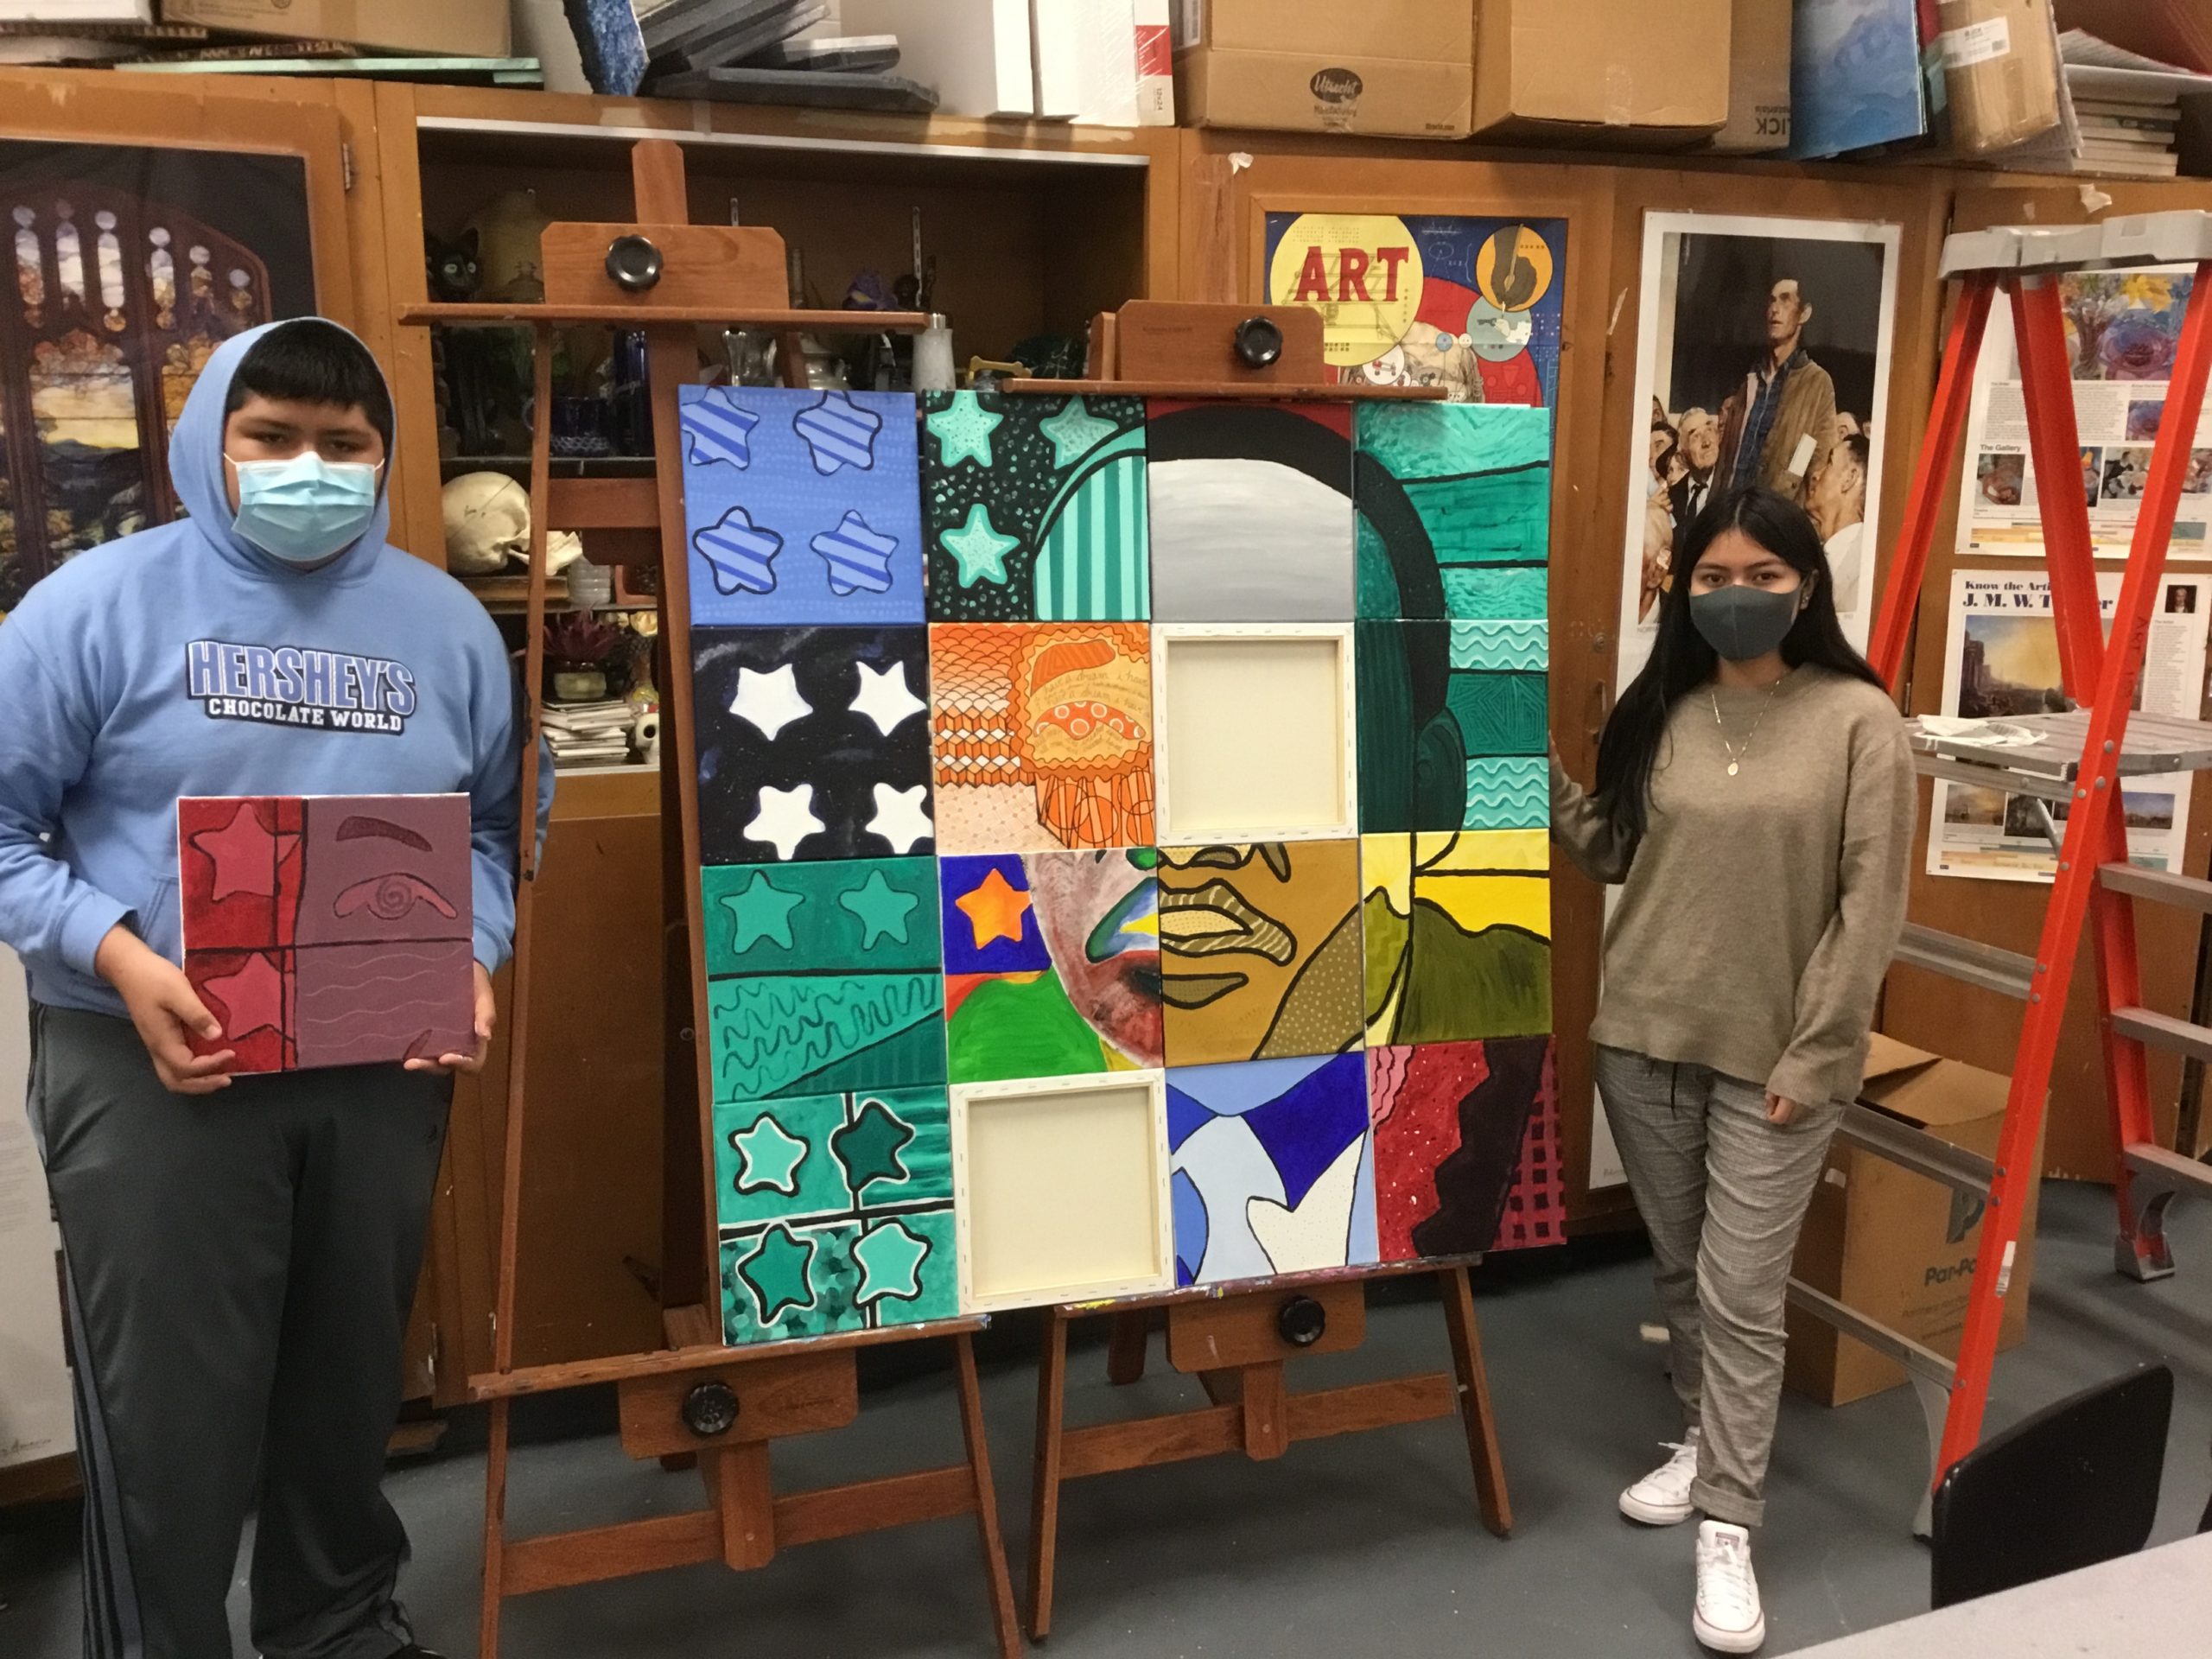 Southampton High School students created a portrait of Martin Luther King Jr. as part of a collaborative project with the East End Arts Council.